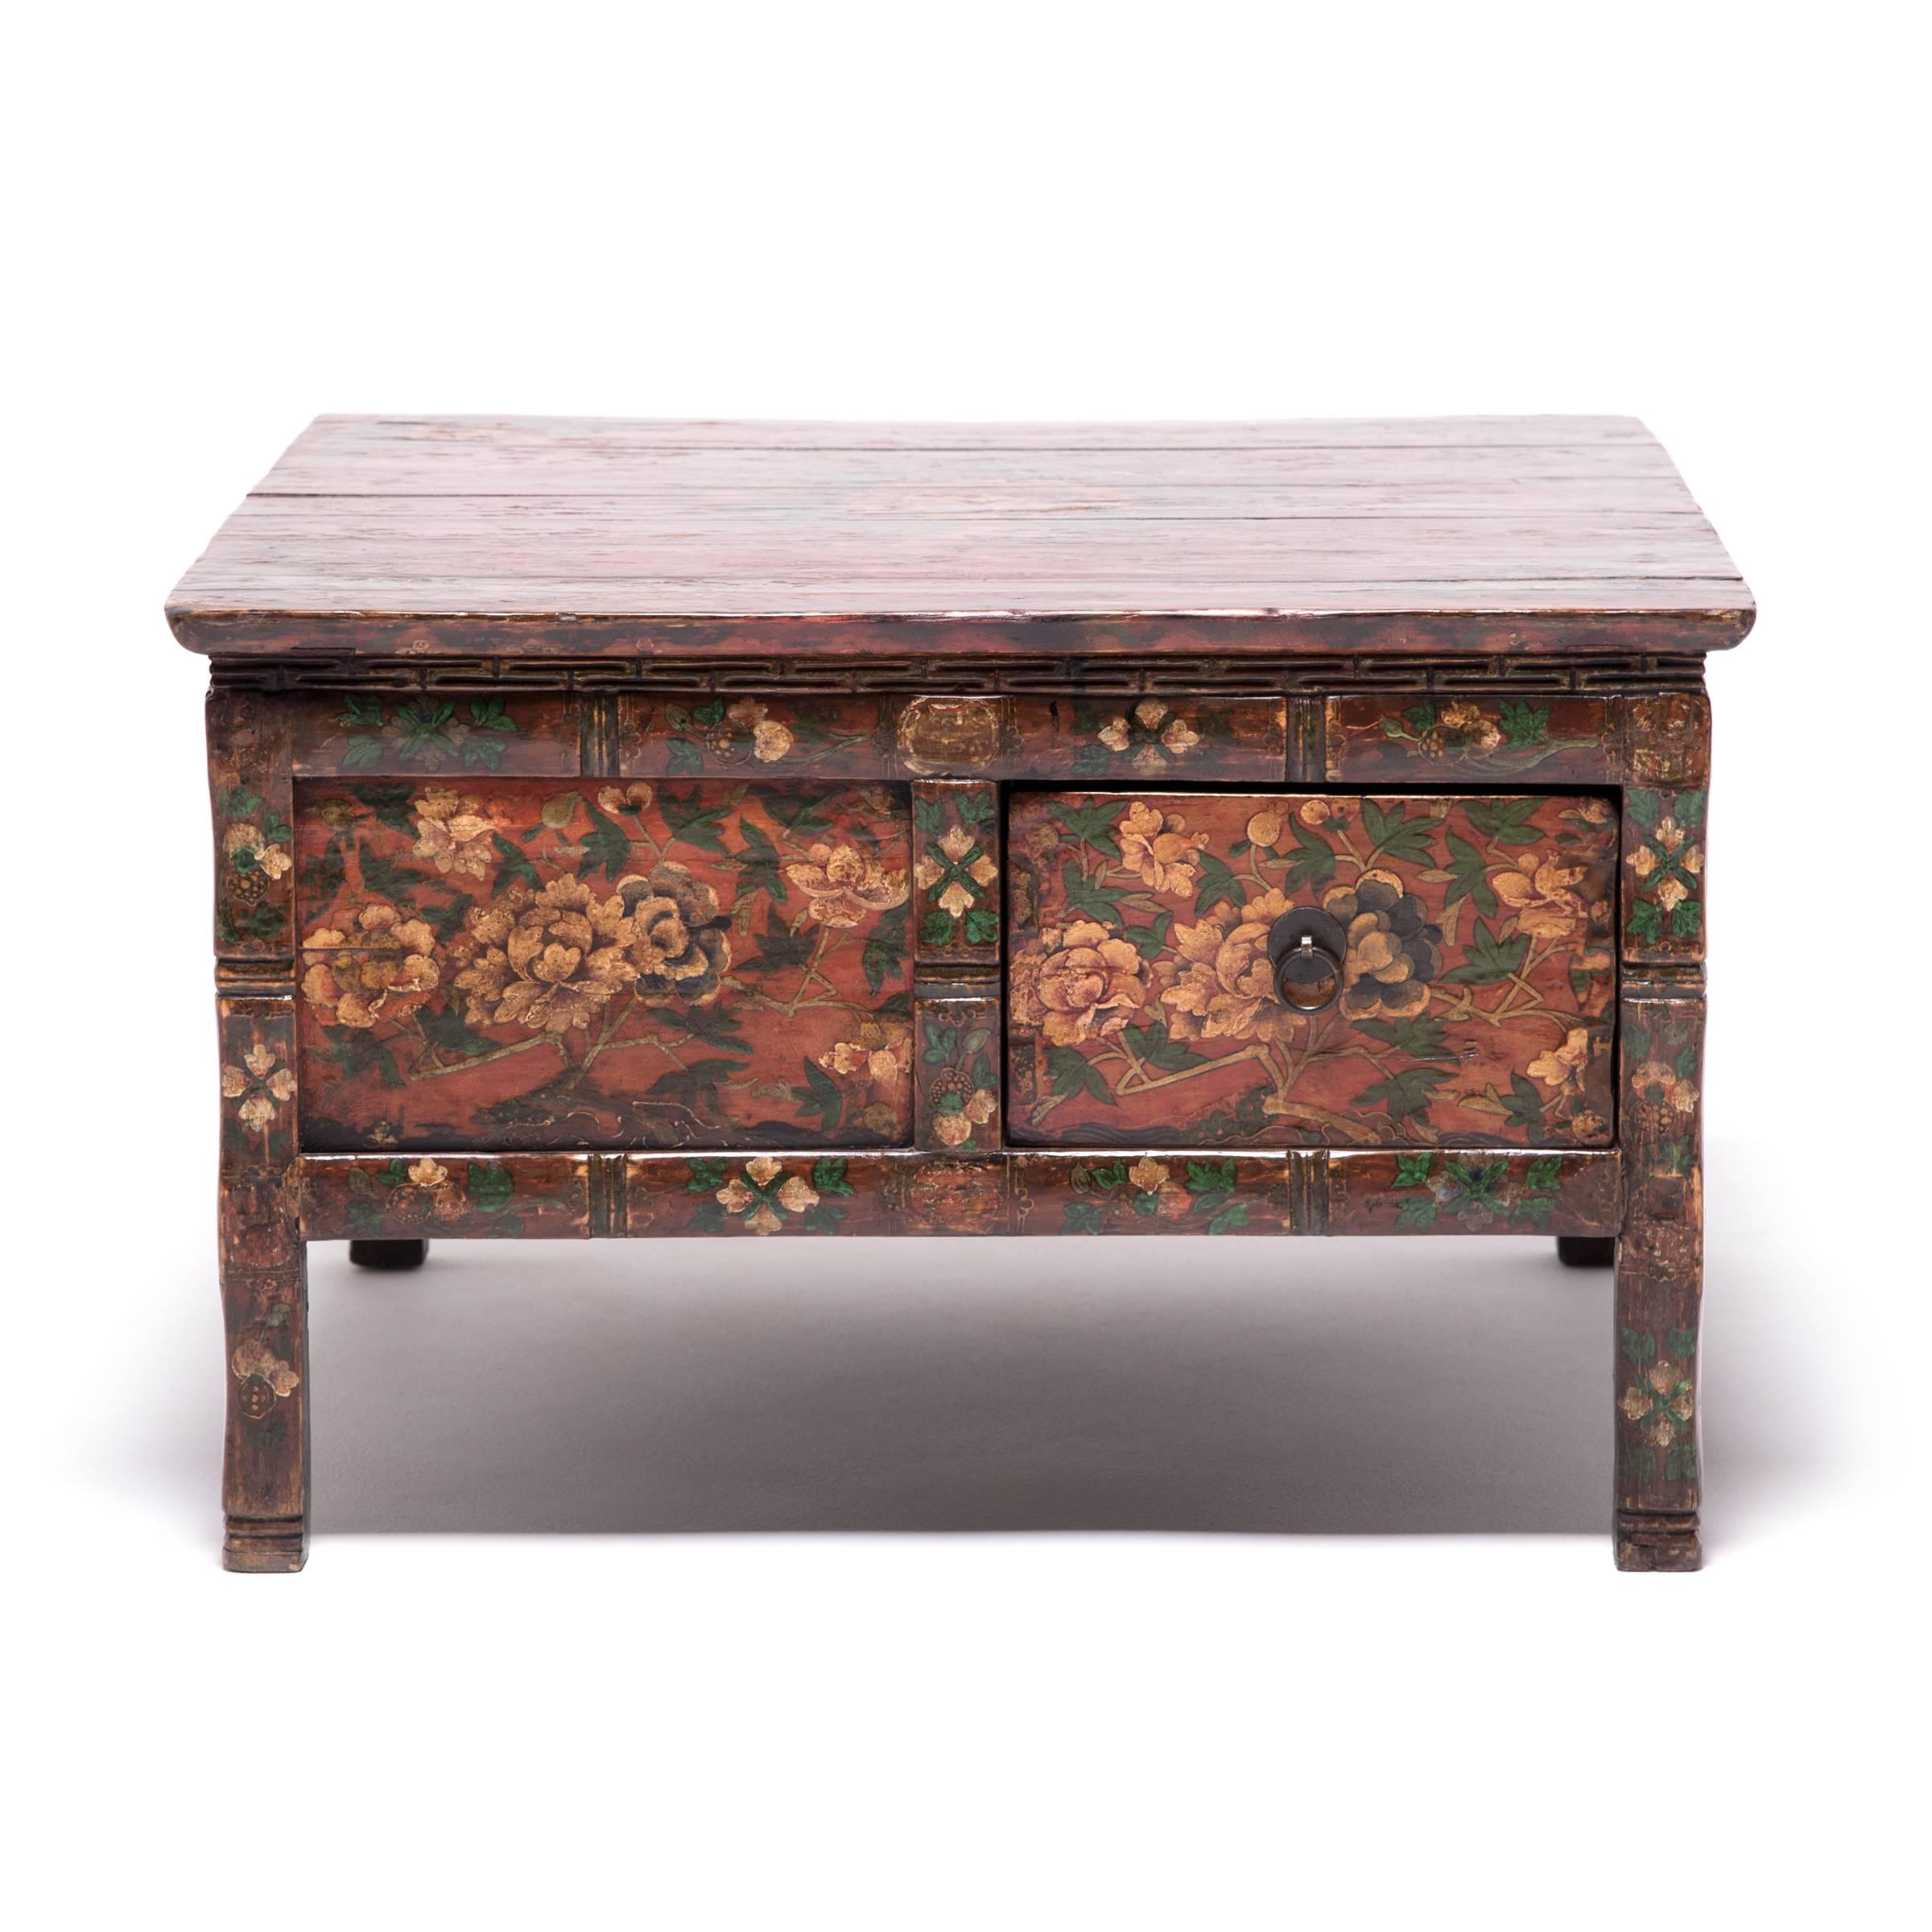 Hand-Painted Low Tibetan Peony Table with Four Drawers, c. 1850